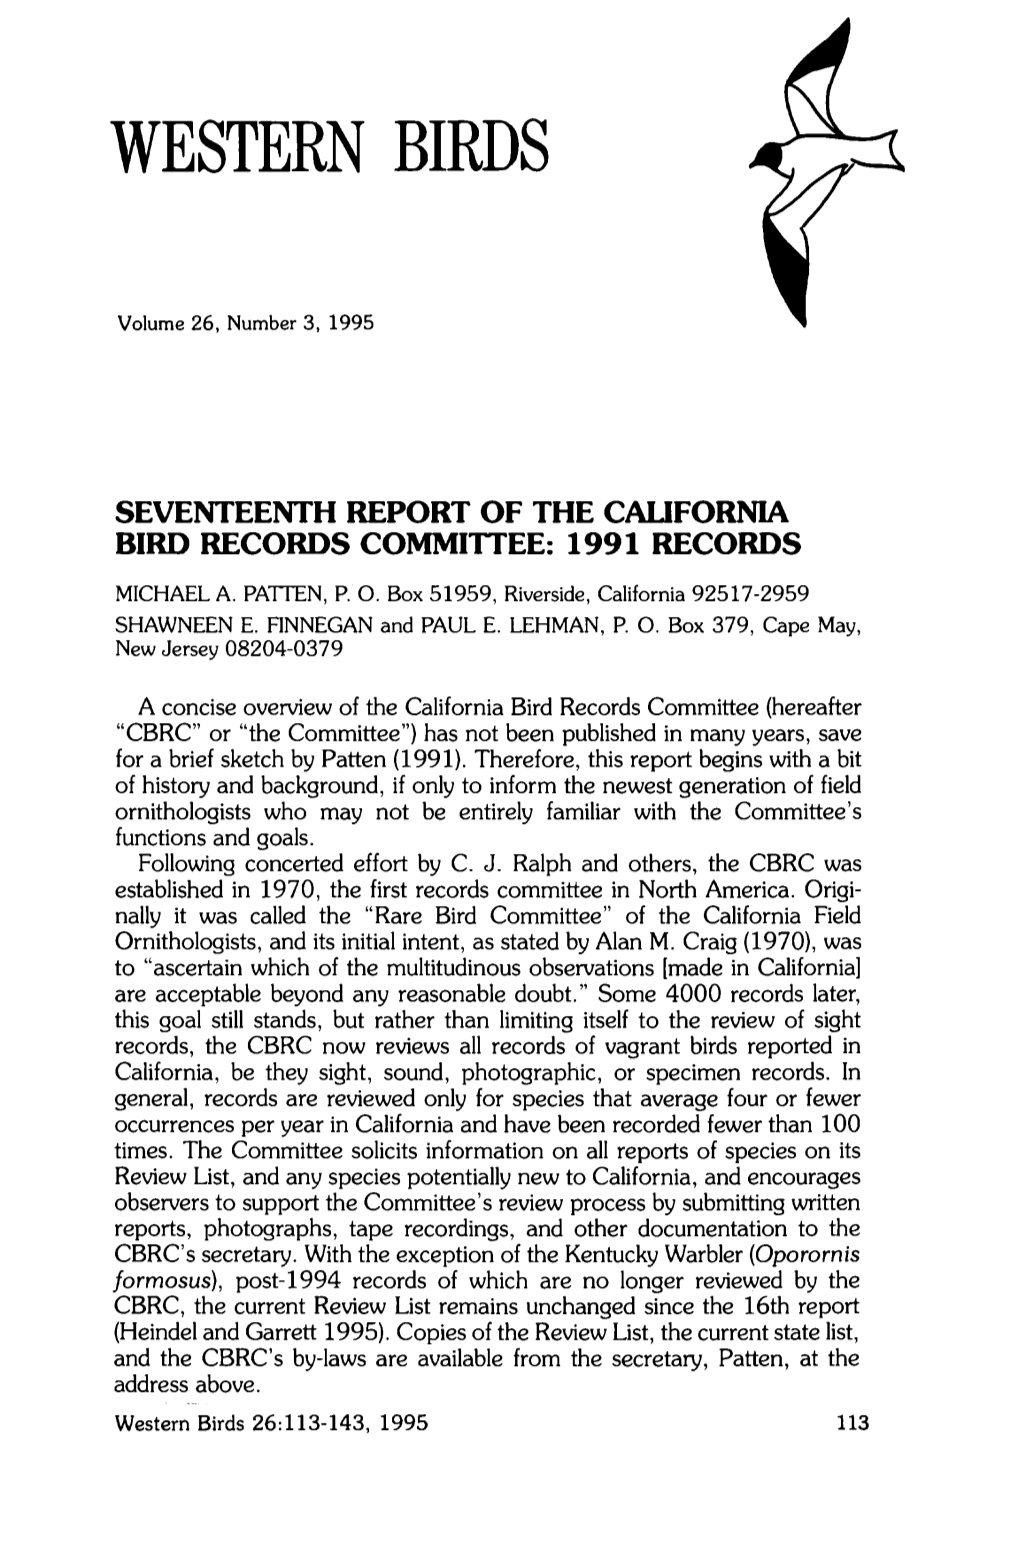 SEVENTEENTH REPORT of the California BIRD RECORDS COMMITTEE: 1991 RECORDS